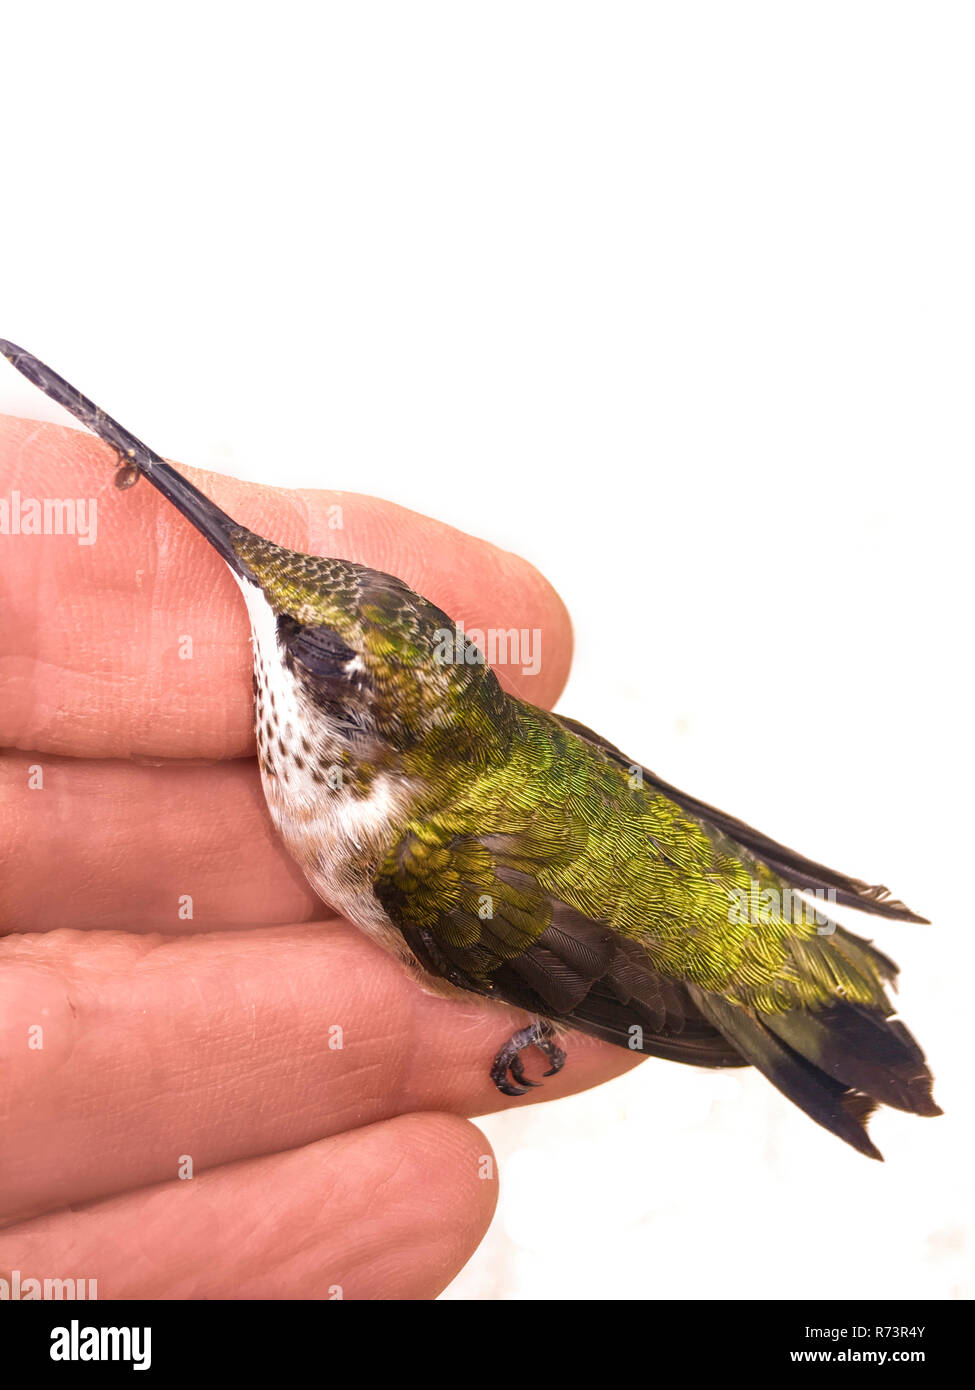 Humming bird Perched on a Hand Stock Photo